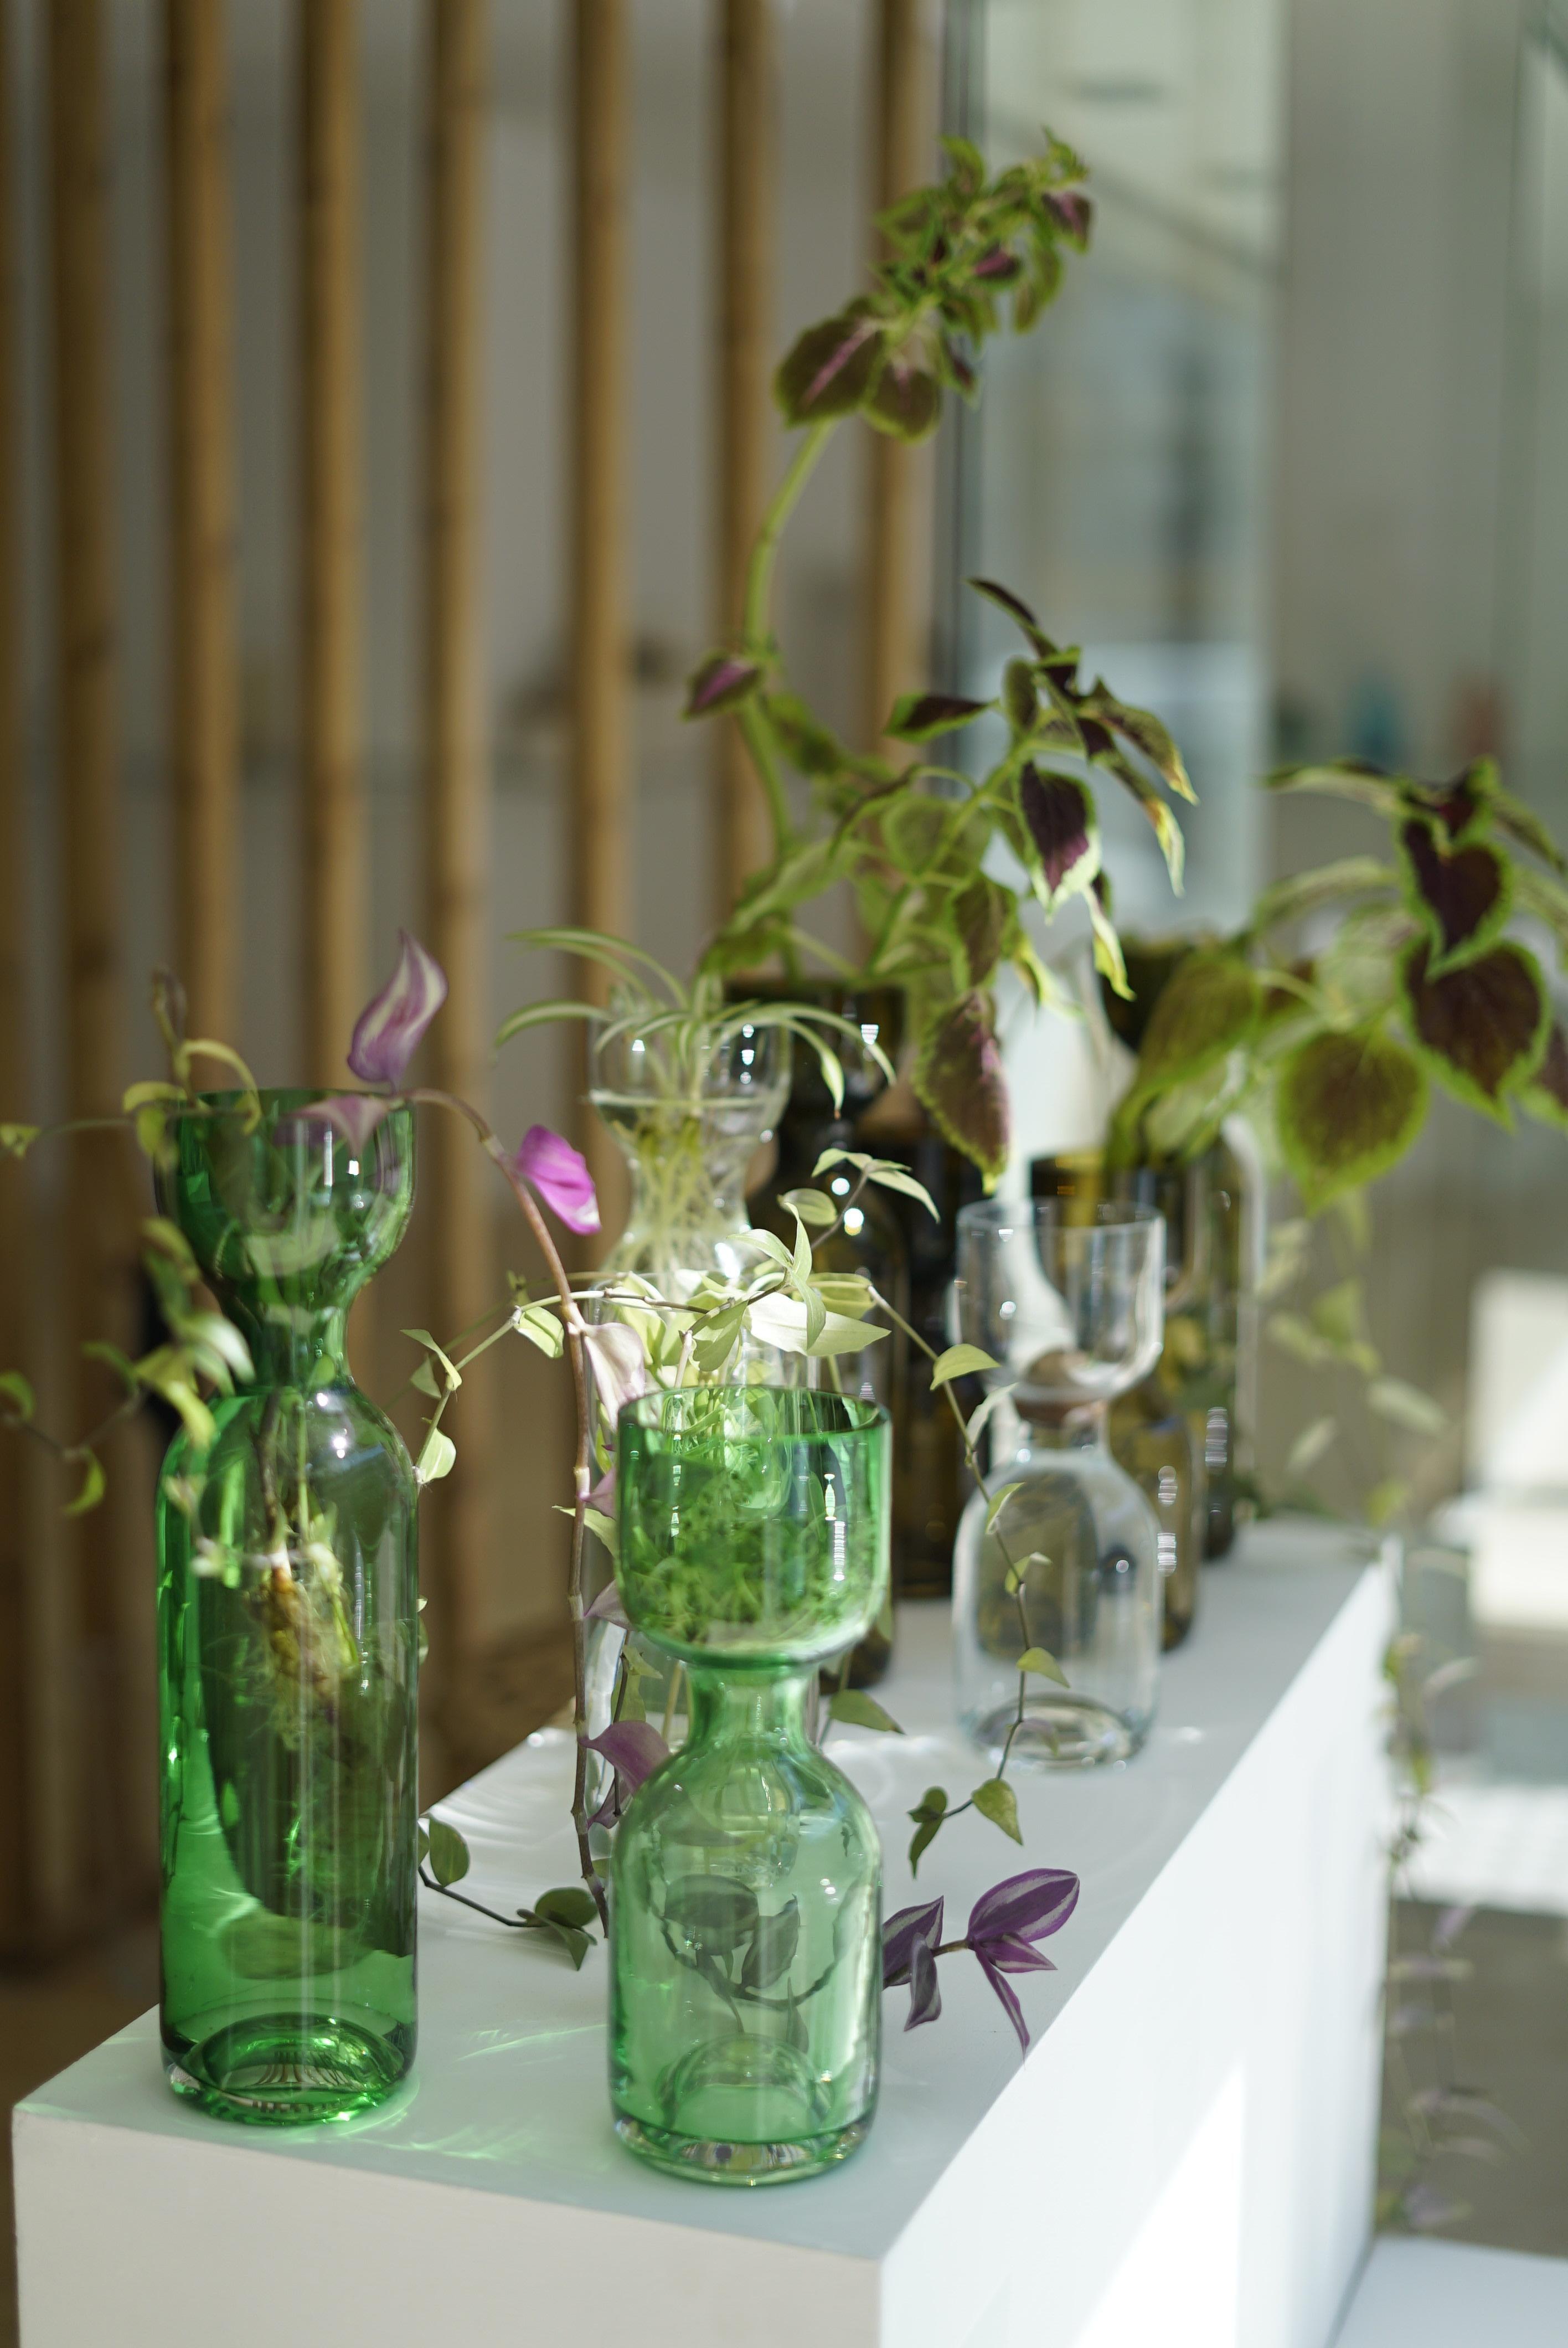 Gargalos is a collection of blown glass vases, designed by Brazillian designers Brunno Jahara and Patricia Bagniewski, made for Vicara. 

Gargalos was born from the meeting between Rio de Janeiro's designer and Brasilia's artist, who initially got